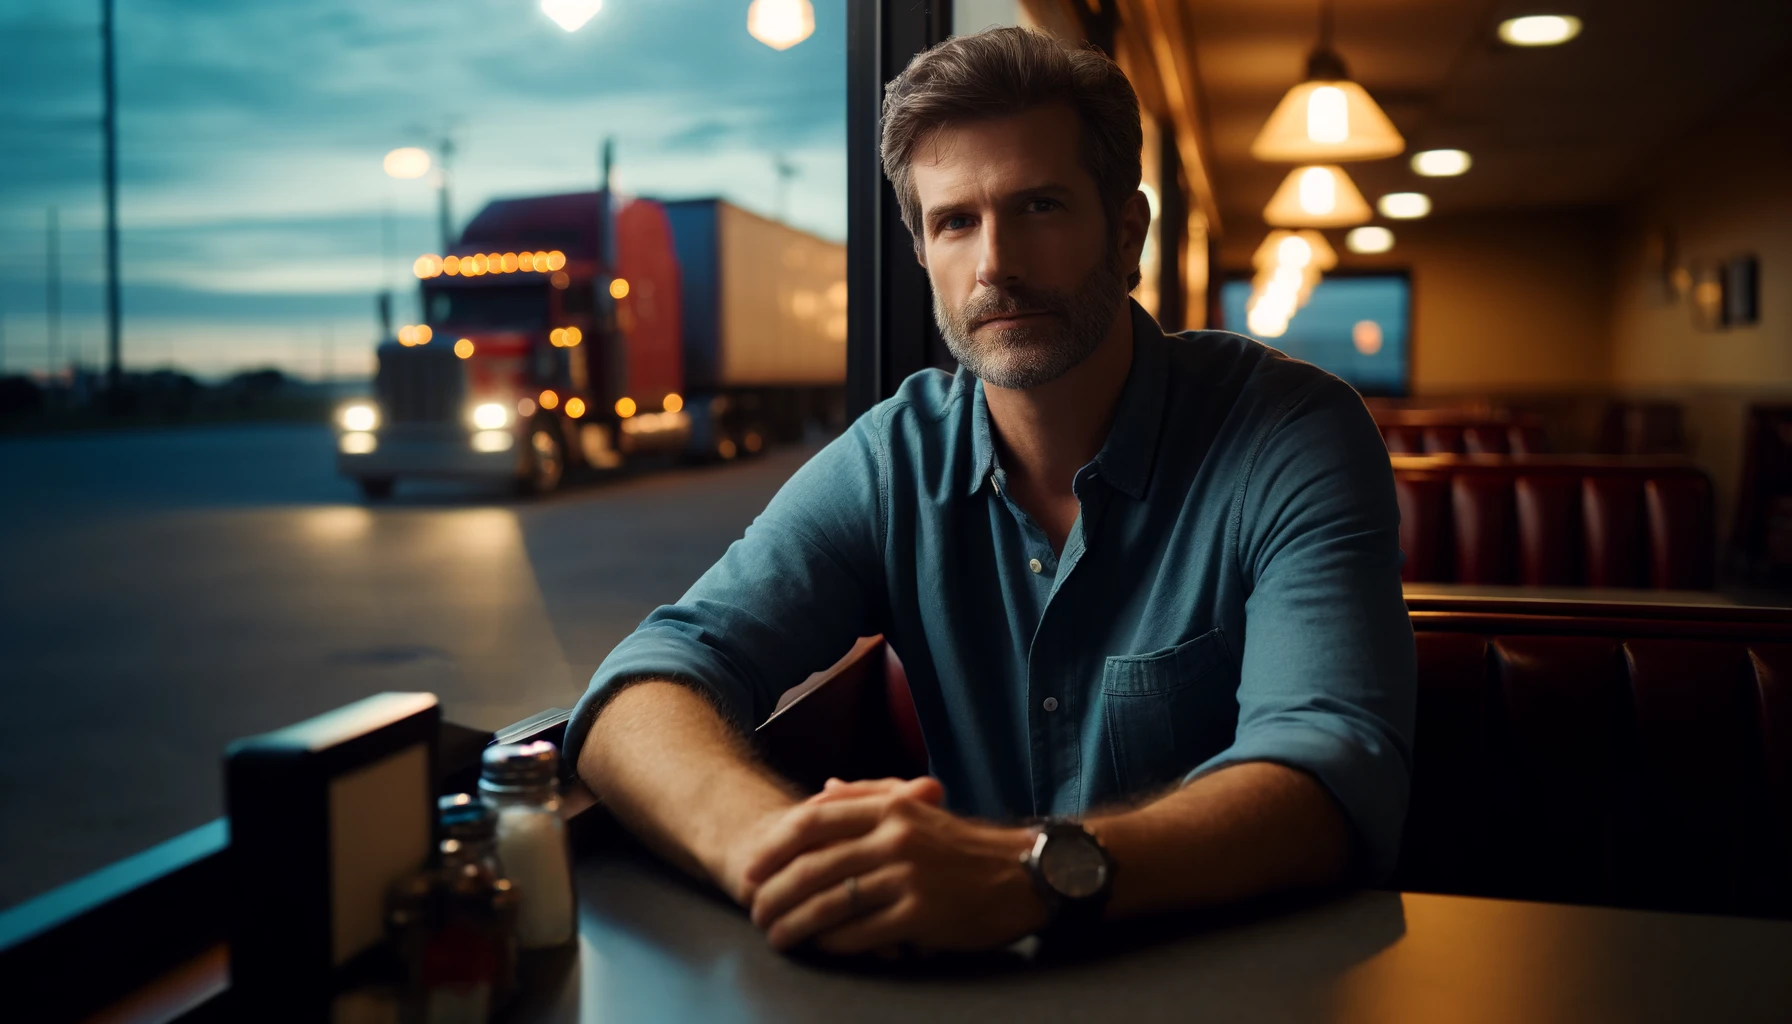 Man sitting in diner at twilight with trucks outside.